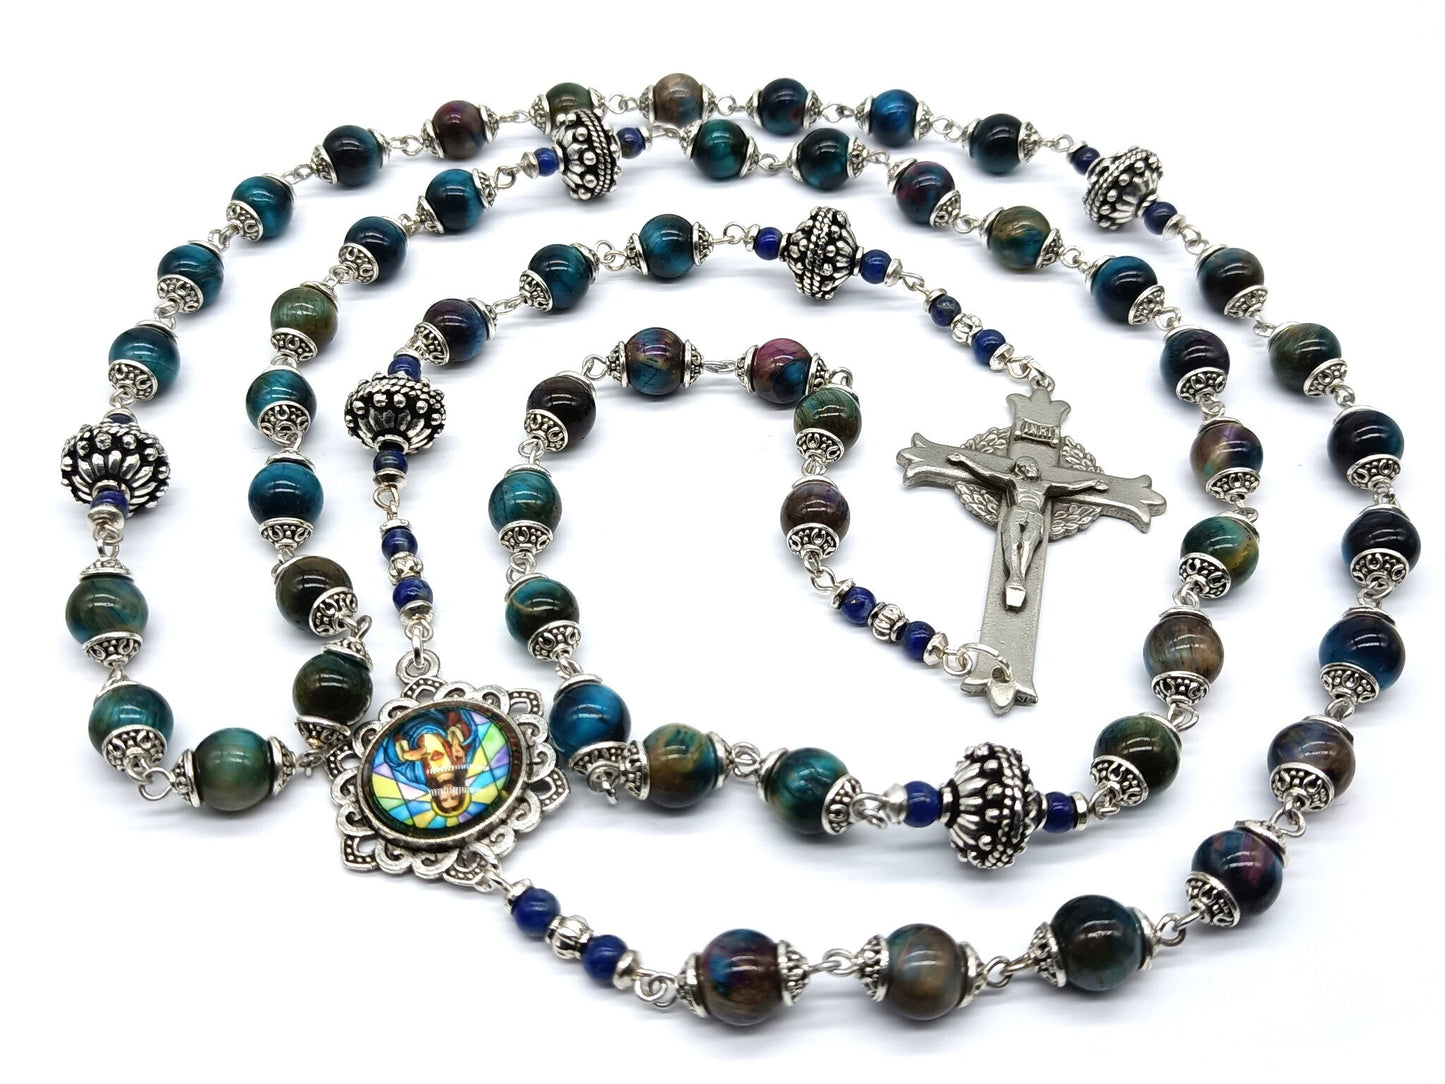 Sacred Heart unique rosary beads circle rosary with tigers eye gemstone beads, linking crucifix, silver pater beads, caps and picture centre medal.